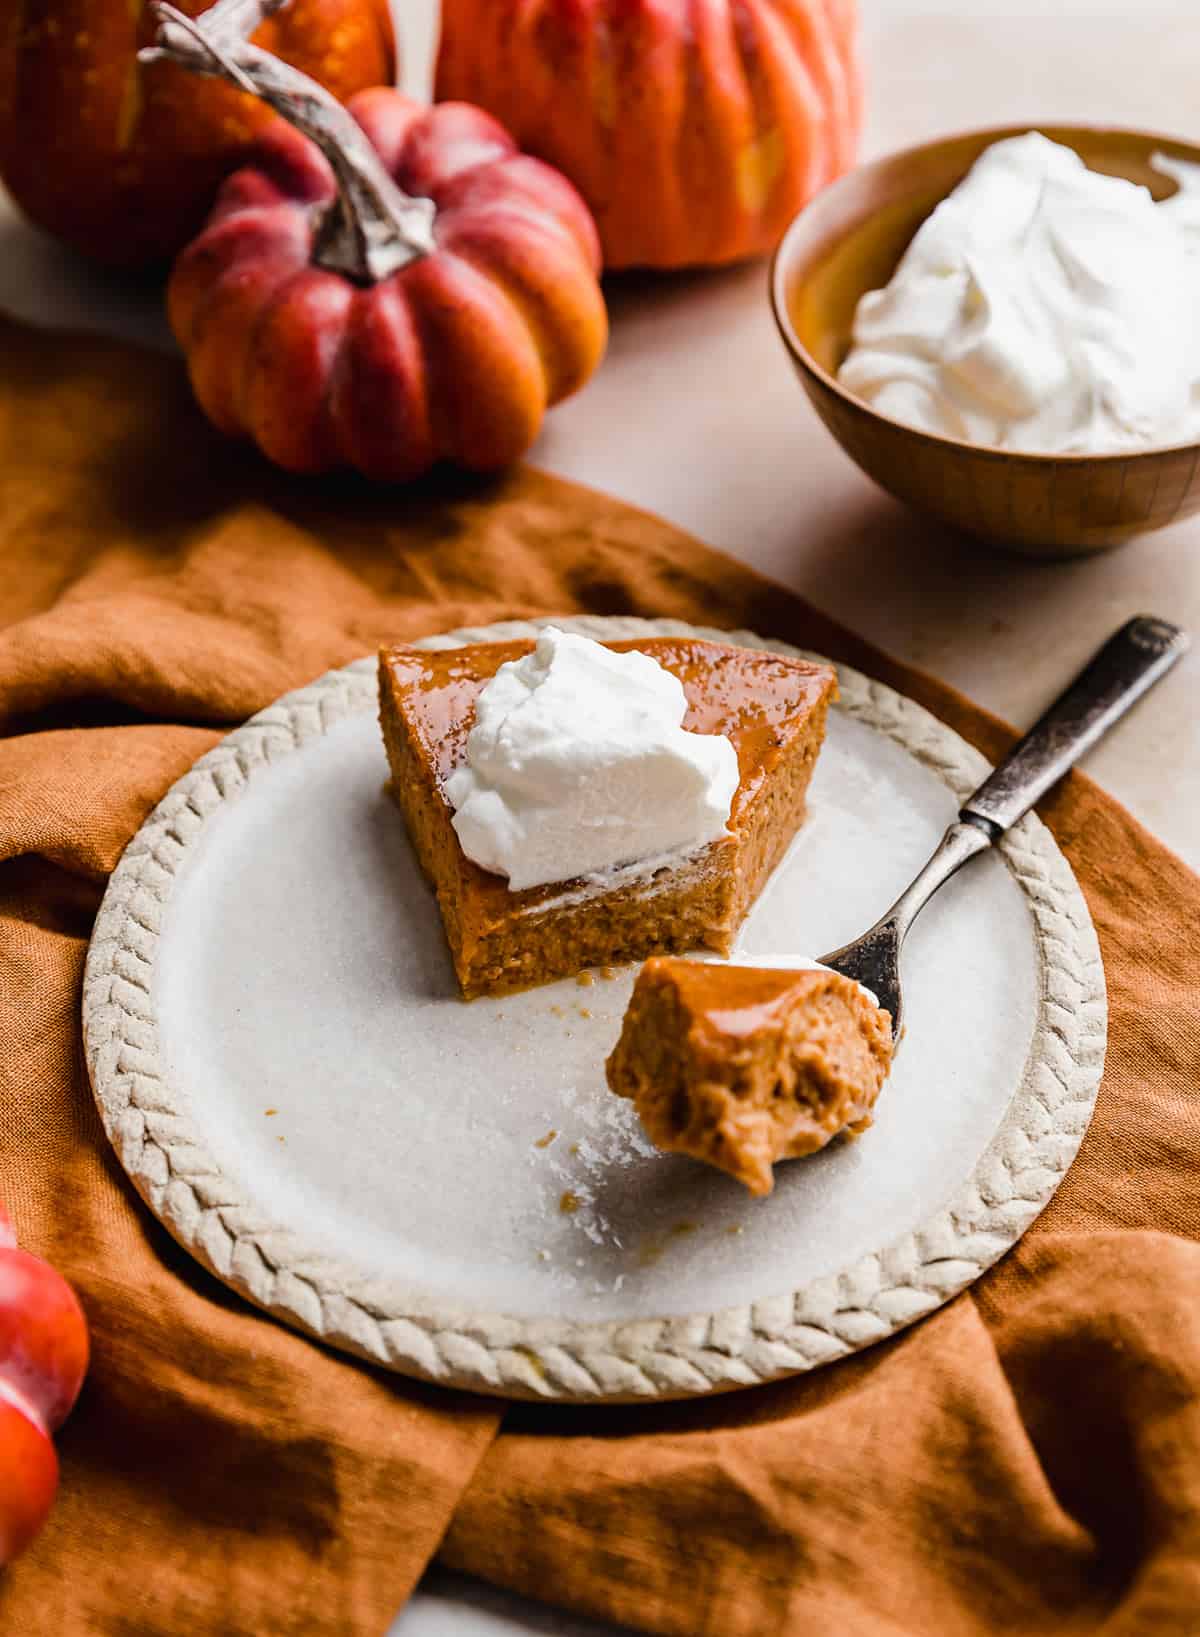 A slice of Crustless Pumpkin Pie on a plate, dolloped with whipped cream.